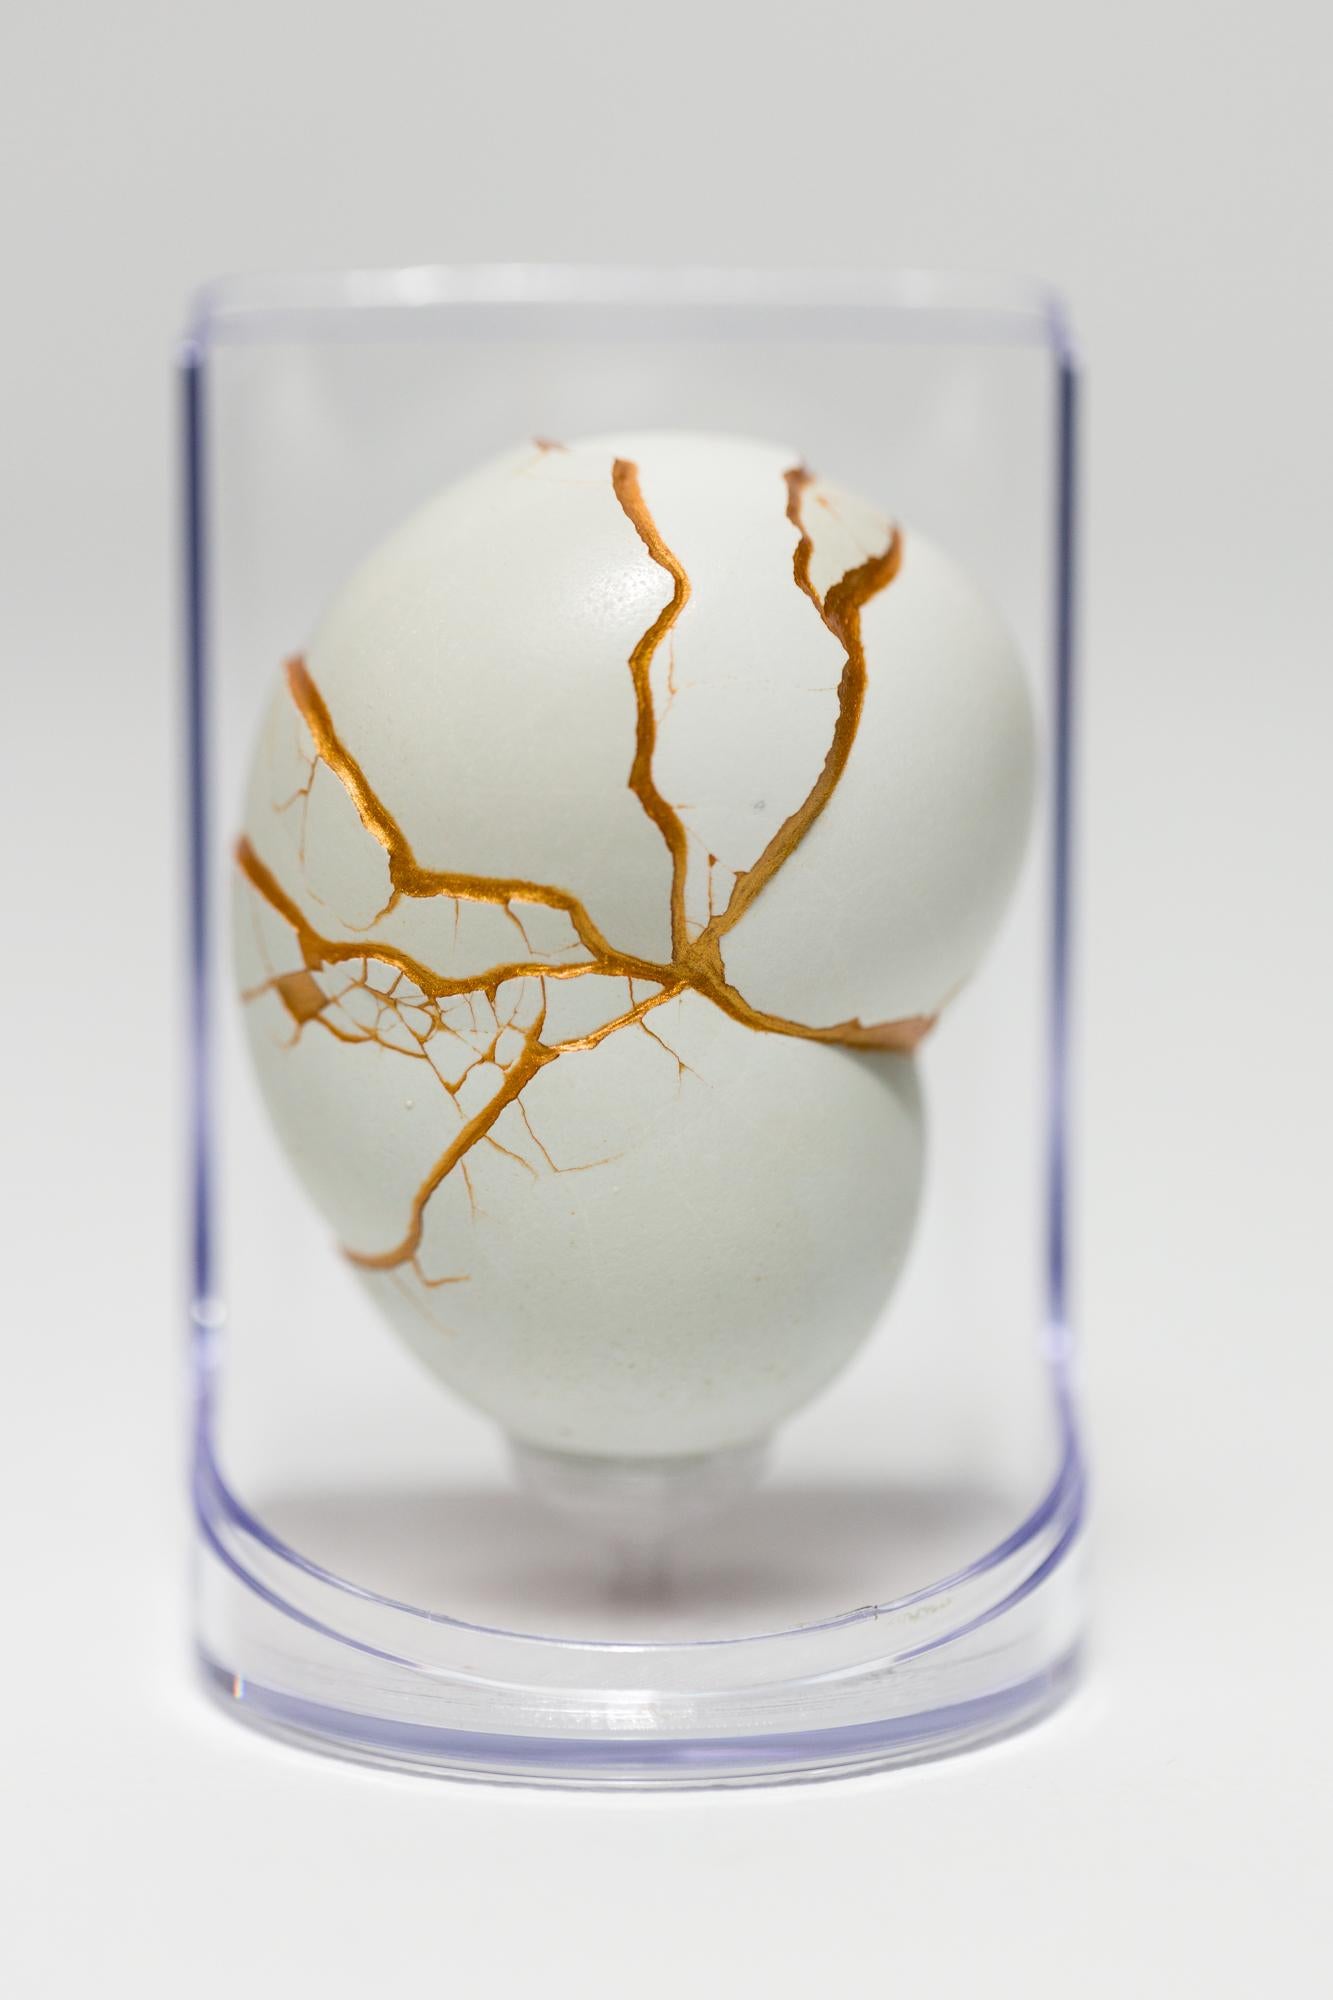 "Day in the Life: Chimaera #12", Found Object Sculpture, Egg Motif - Mixed Media Art by Katie VanVliet